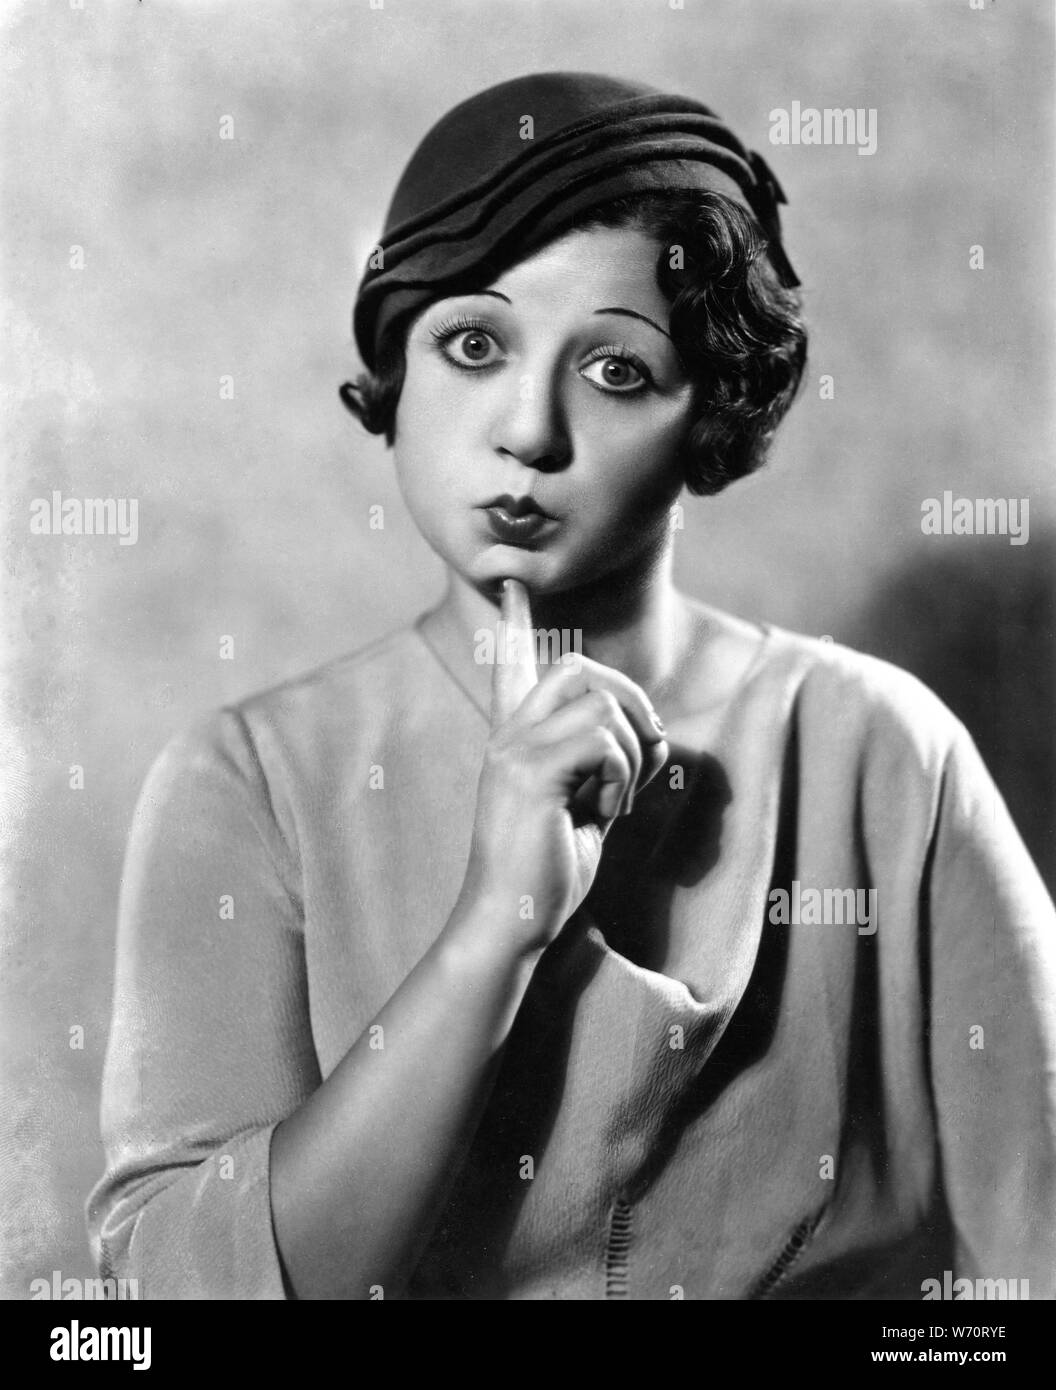 MAE QUESTEL circa 1931 Portrait : the voice actress of BETTY BOOP 1931 - 1939 and POPEYE's girlfriend OLIVE OYL  1933 -1938 and 1944-1962 and SWEE'PEA among many others Fleischer Studios / Paramount Pictures Stock Photo